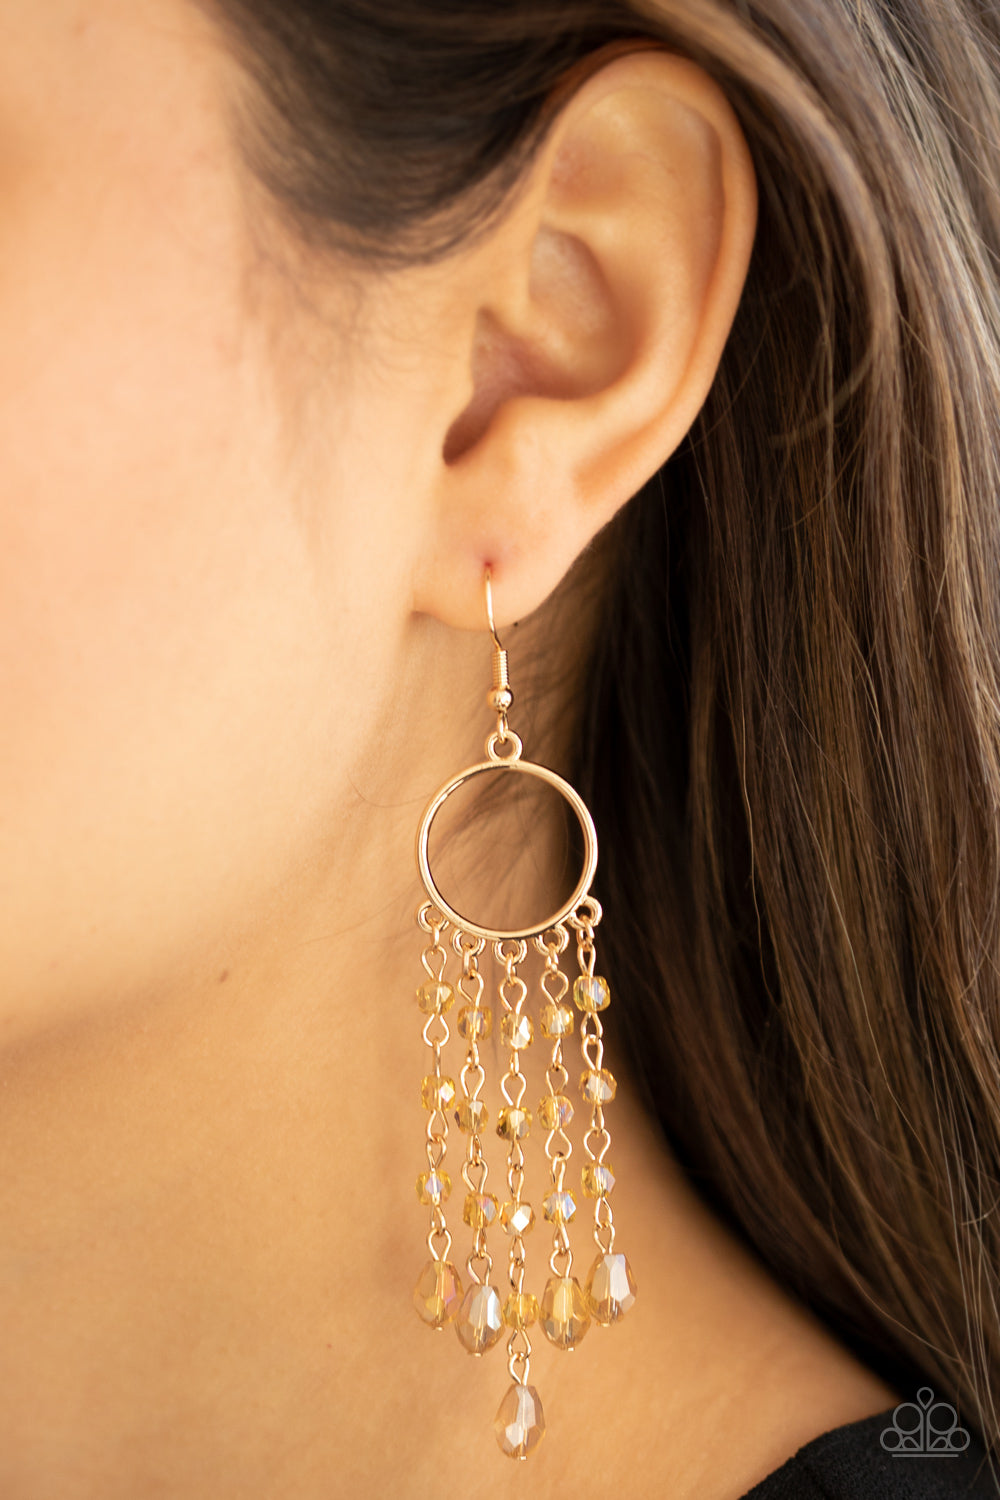 Dazzling Delicious Earrings - Gold